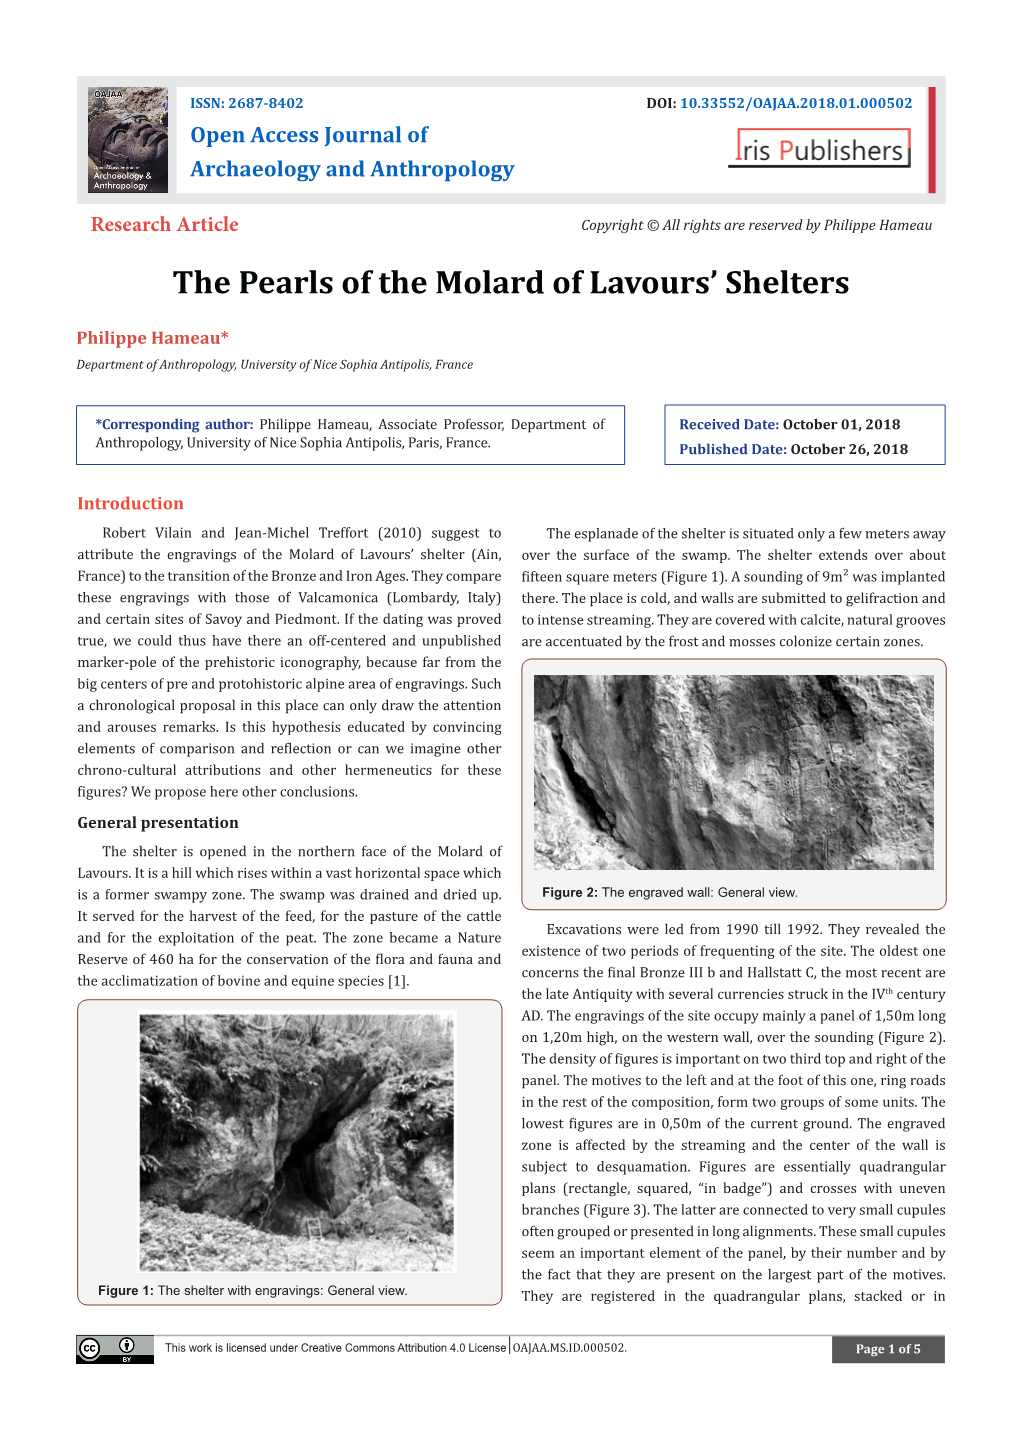 The Pearls of the Molard of Lavours' Shelters